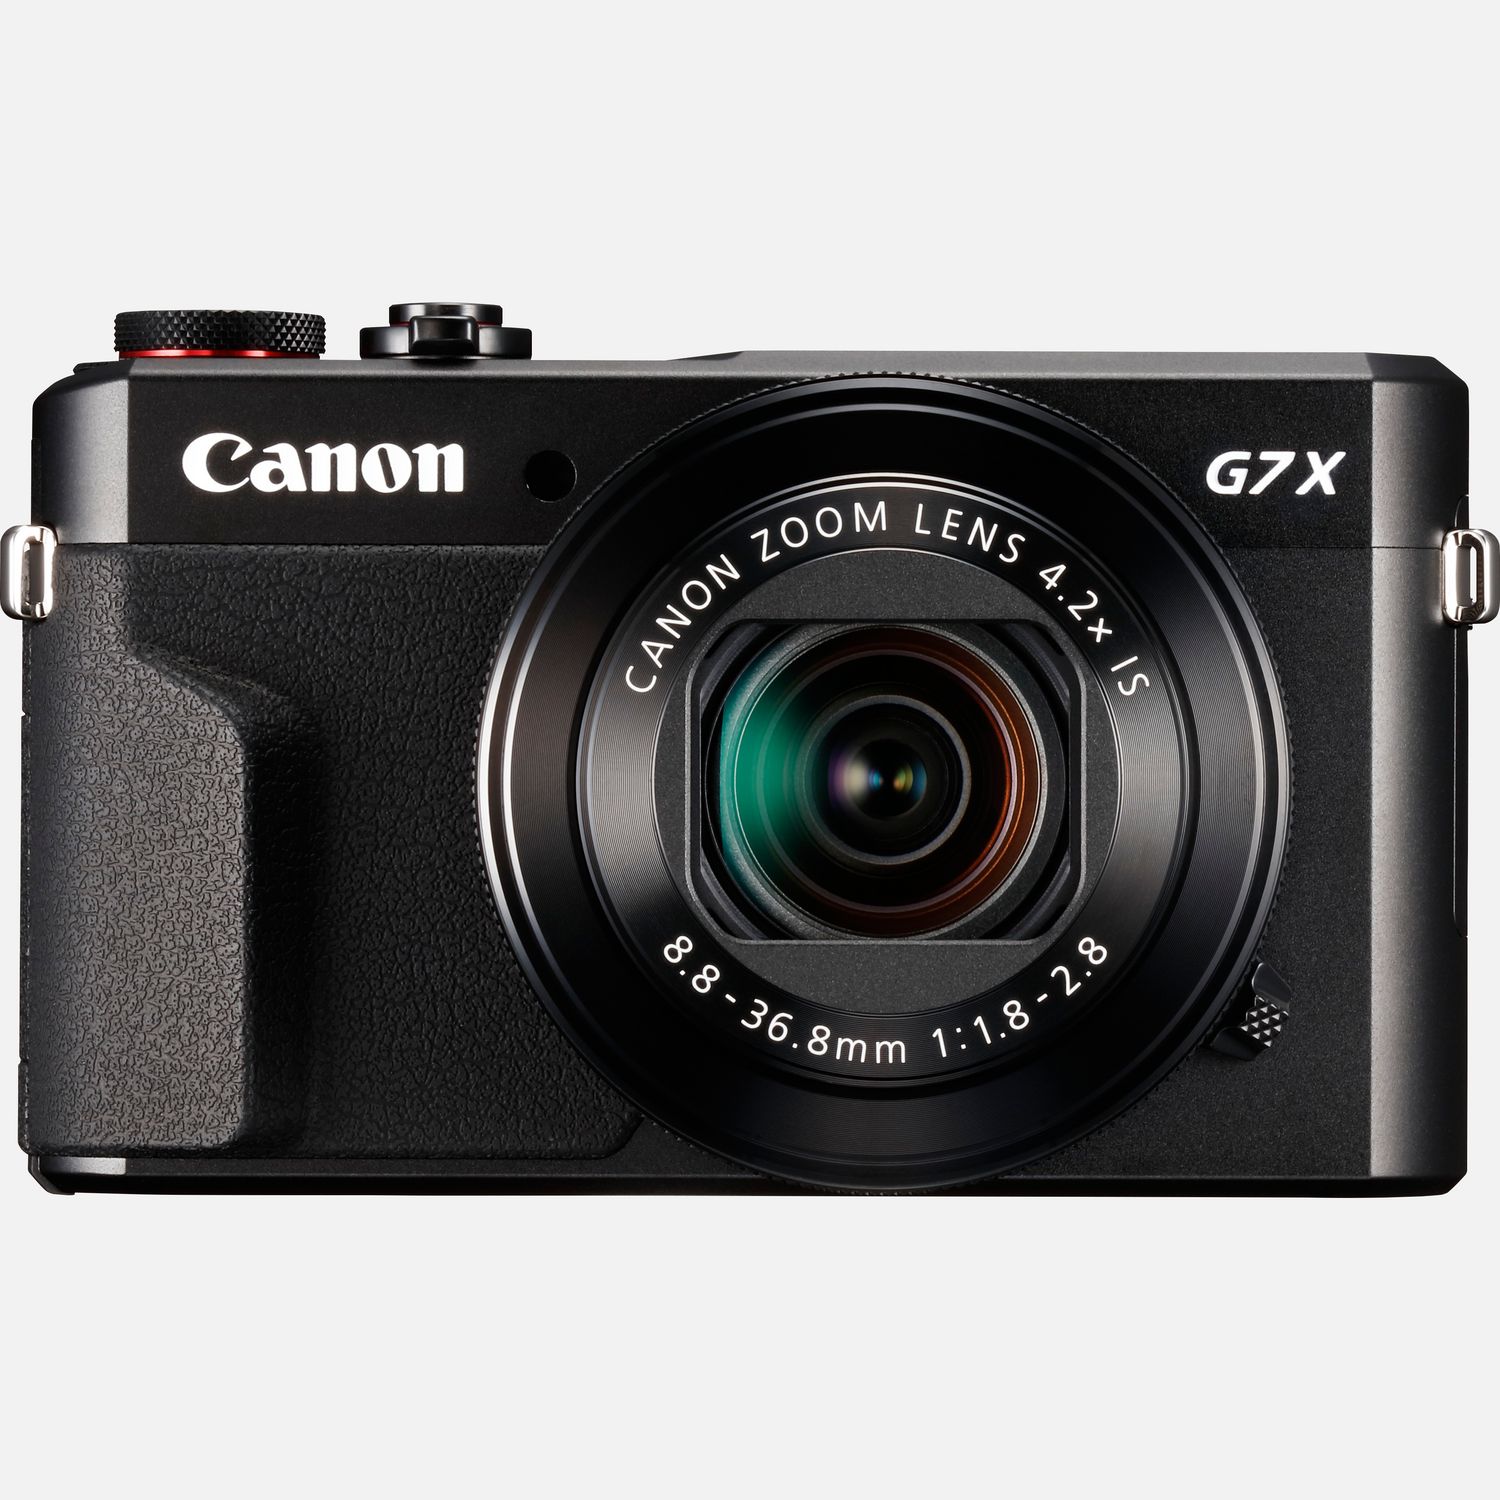 Canon PowerShot G7 X review: Canon's G7 X is a swell but slow